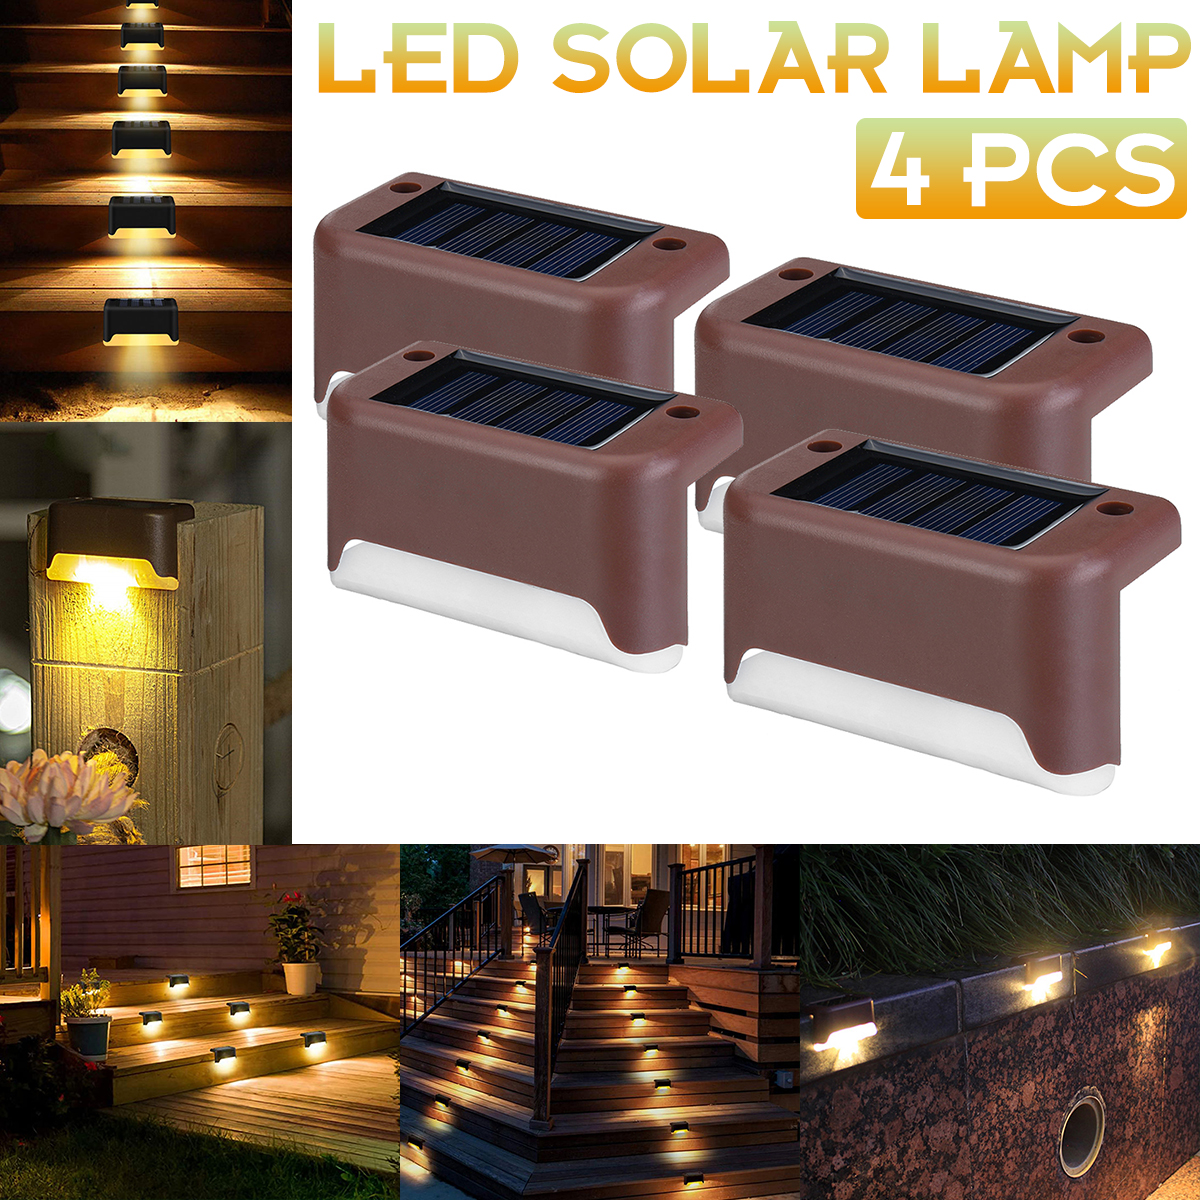 4PCS-LED-Solar-Path-Stair-Lamp-Outdoor-Waterproof-Wall-Lawn-Light-for-Garden-Home-1754581-1